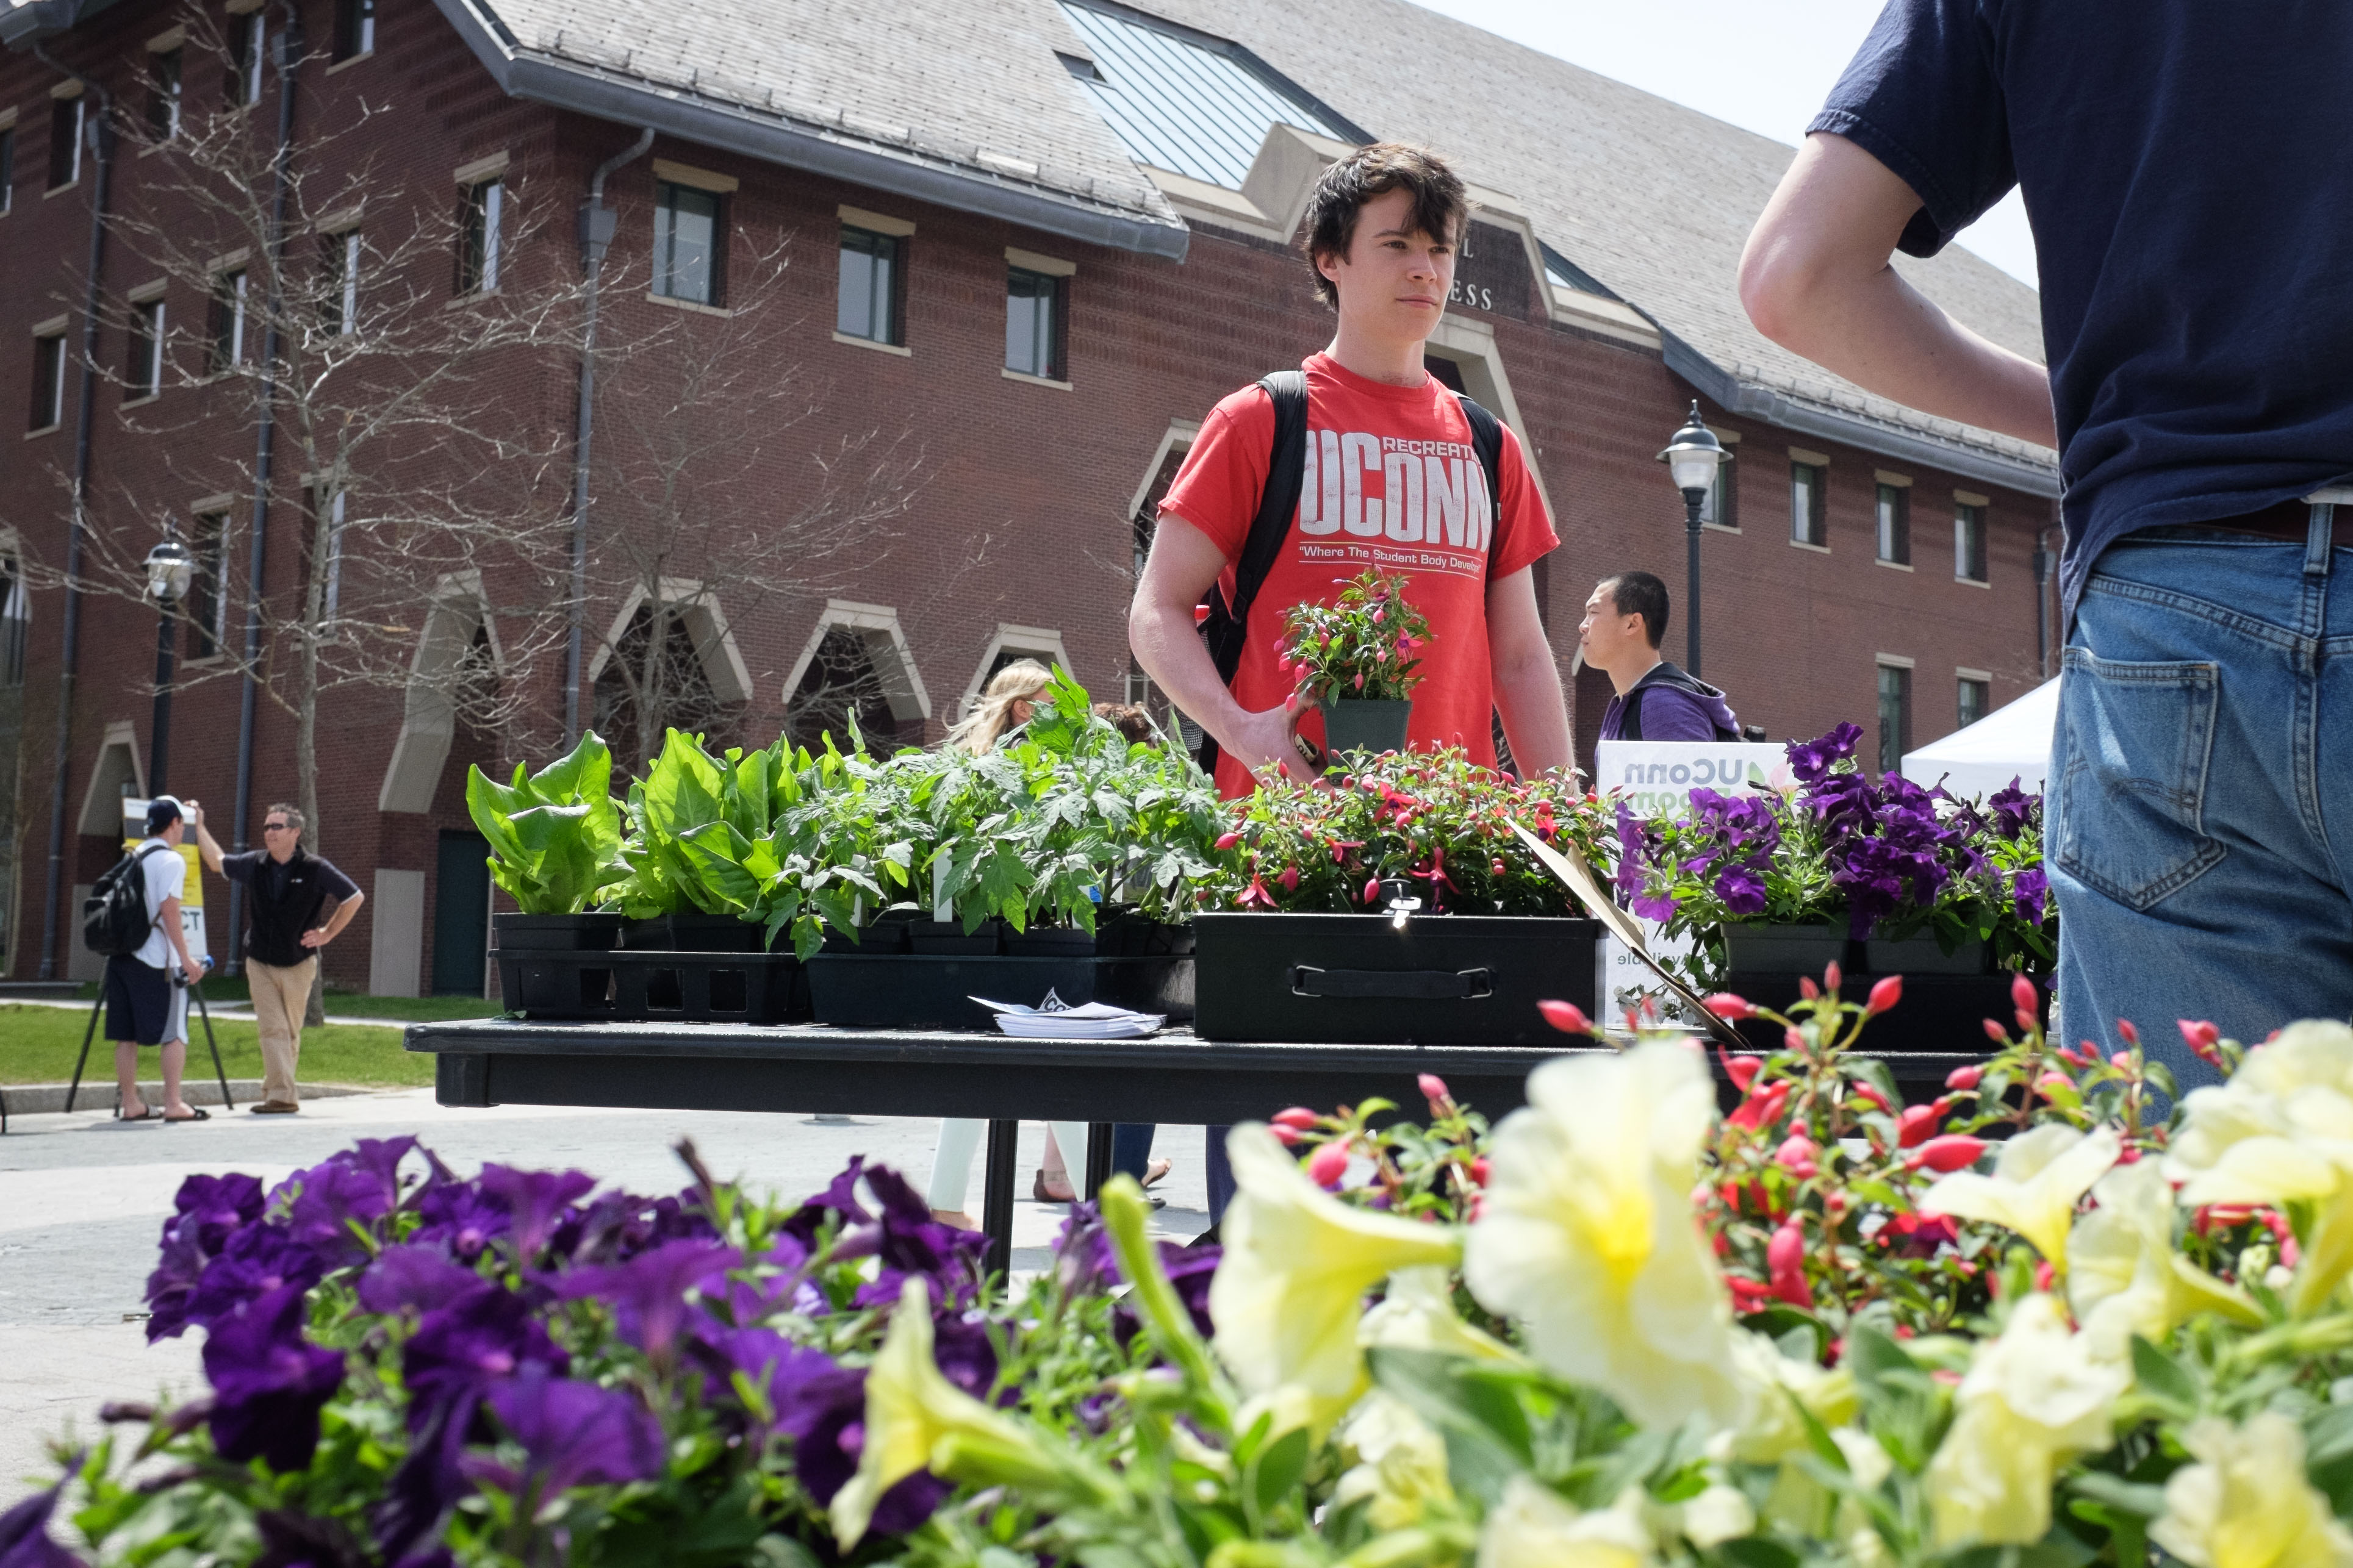 The annual Earth Week Spring Fling on Fairfield Way is one of the many University-wide efforts to incorporate sustainability into all facets of campus life. (Peter Morenus/UConn Photo)